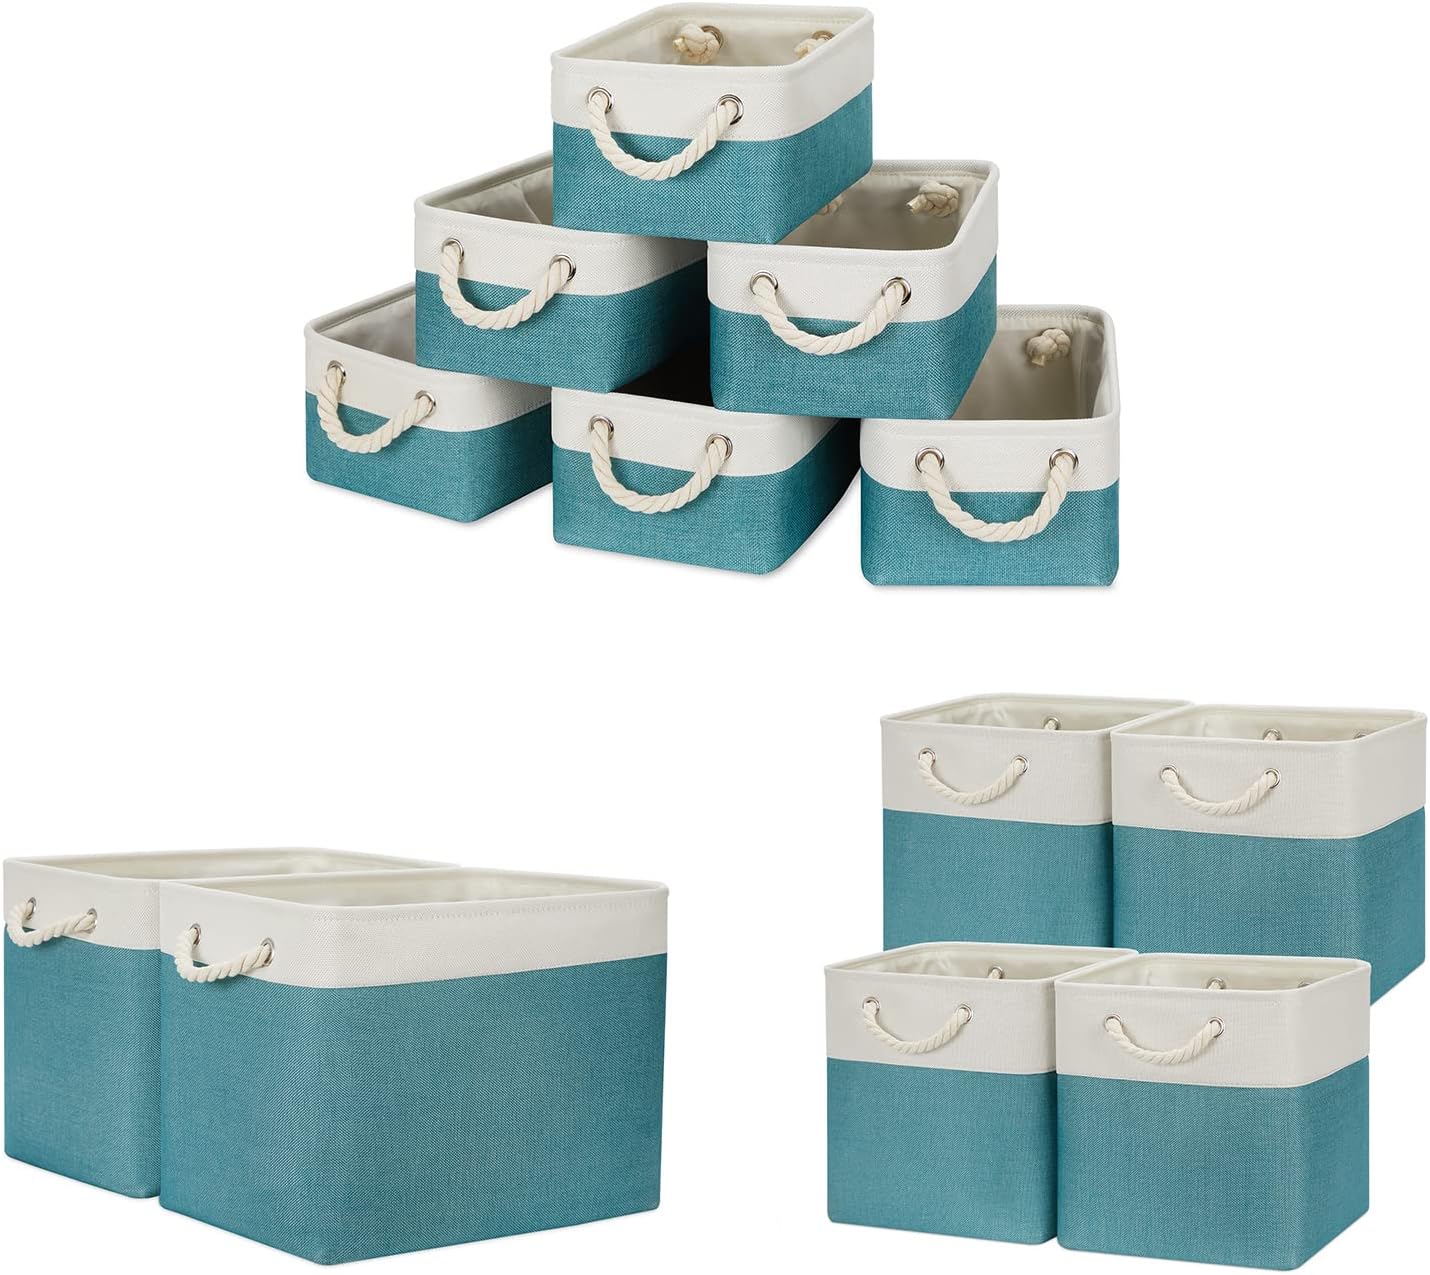 Temary Collapsible Storage Cubes Fabric Storage Baskets Decorative Baskets for Gifts Empty (White&Teal, 6Pack-11.8Lx7.9Wx5.3H , 2Pack-16Lx12Wx12H , 4Pack-12Lx12Wx12H )